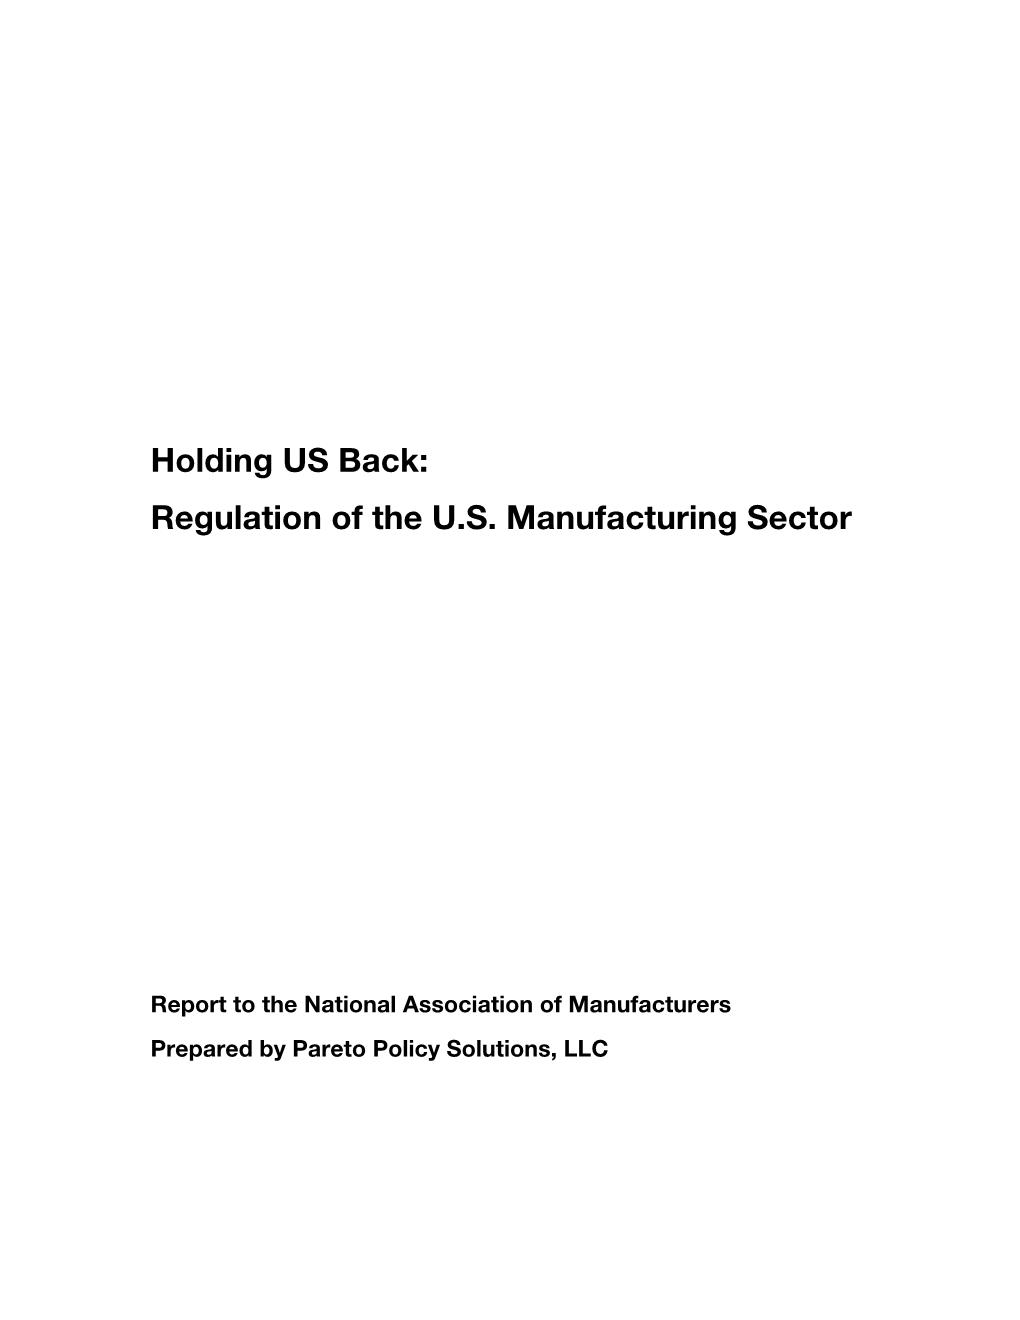 Regulation of the US Manufacturing Sector